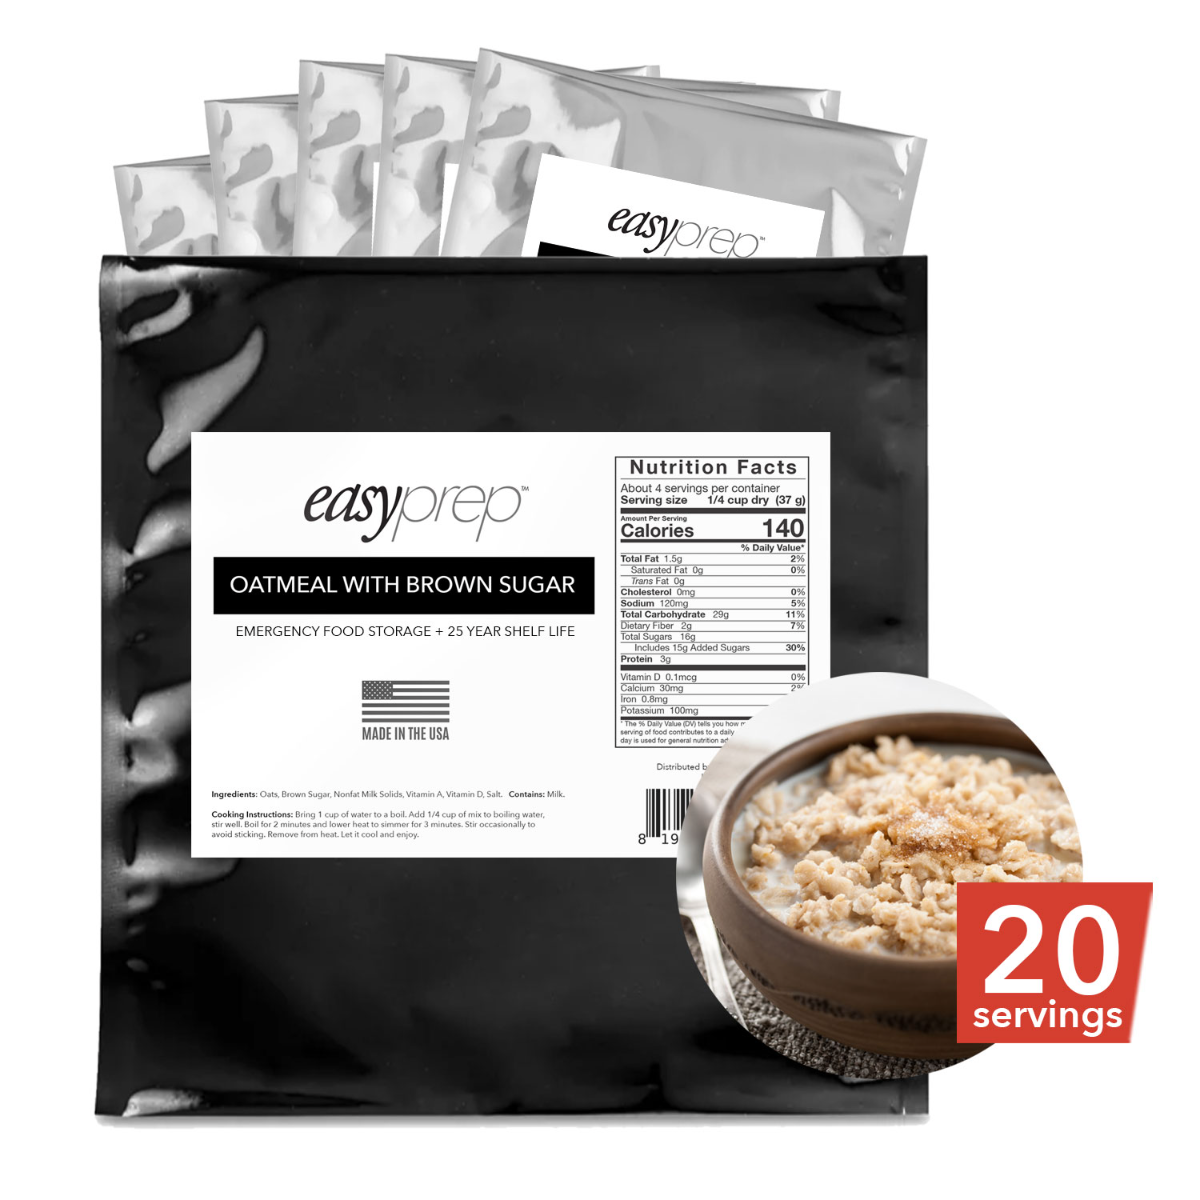 EasyPrep Oatmeal with Brown Sugar 5-Pack Pouch